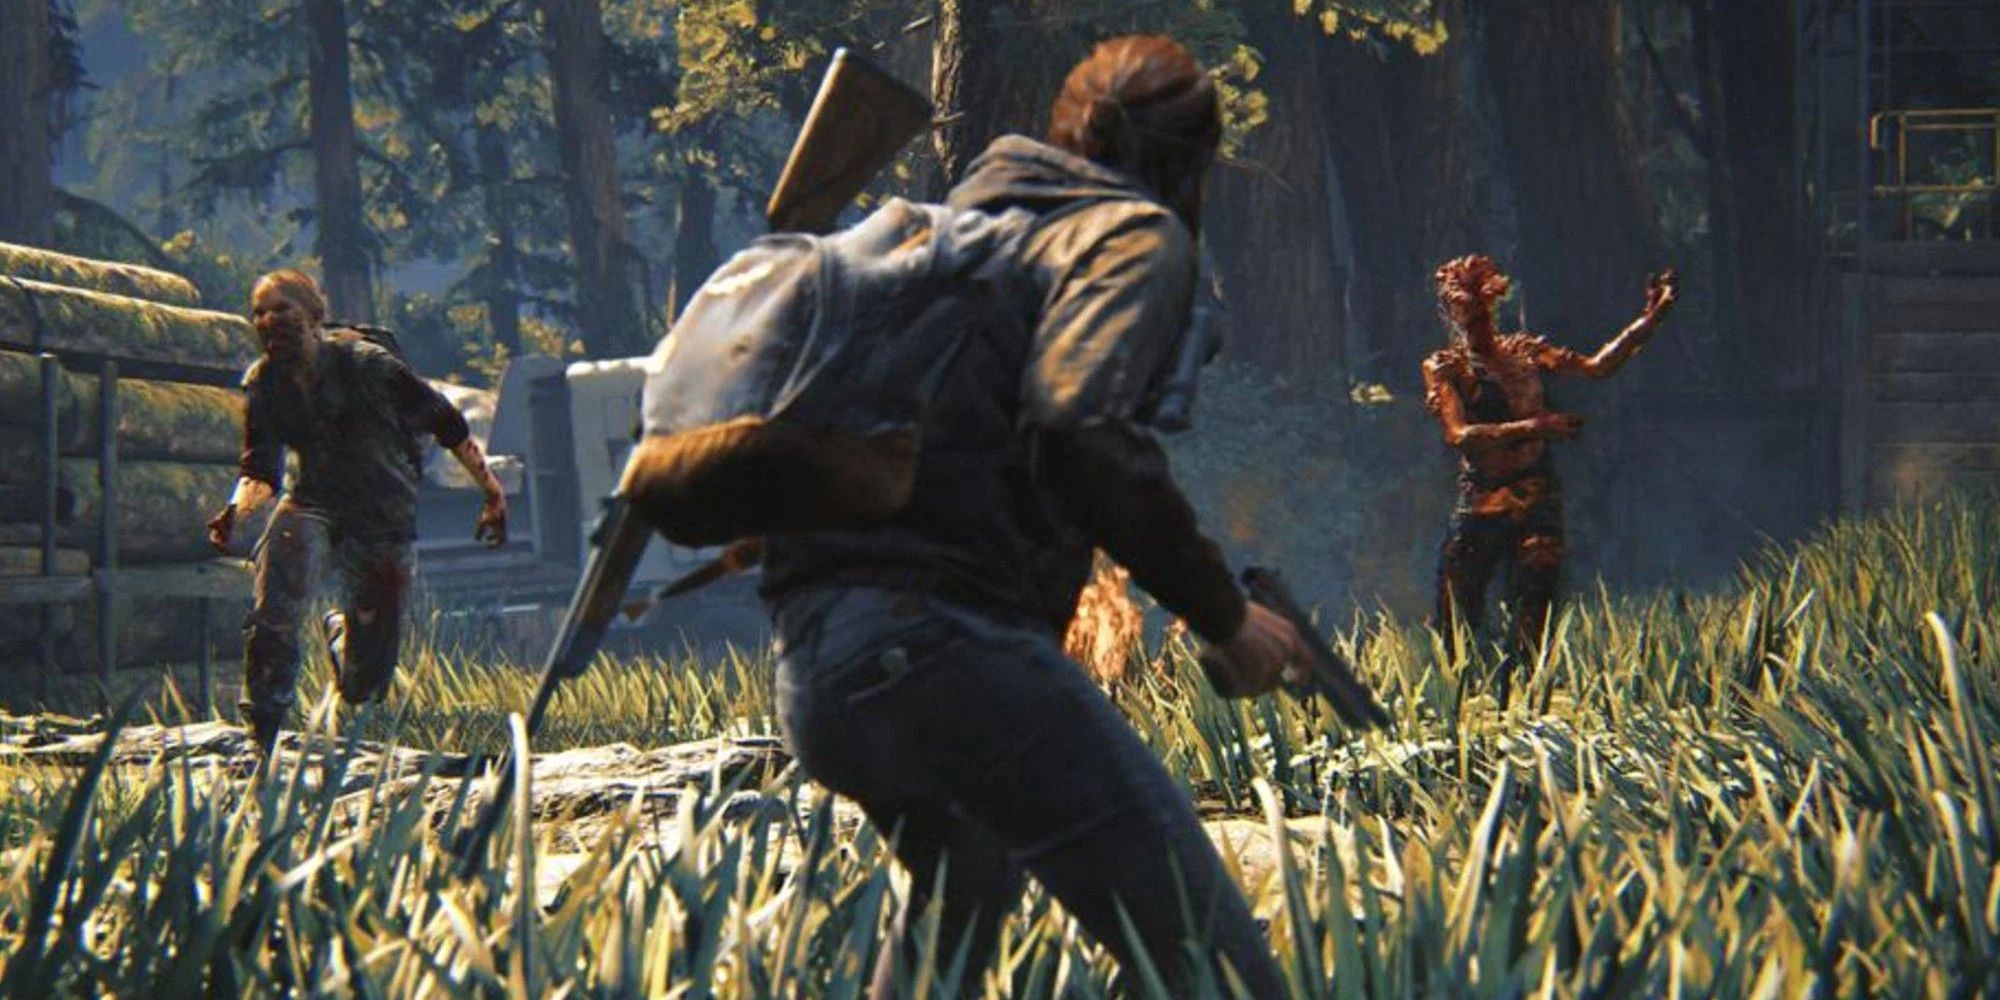 The Last Of Us Part 2: Ellie With gun And Clicker enemies in a field